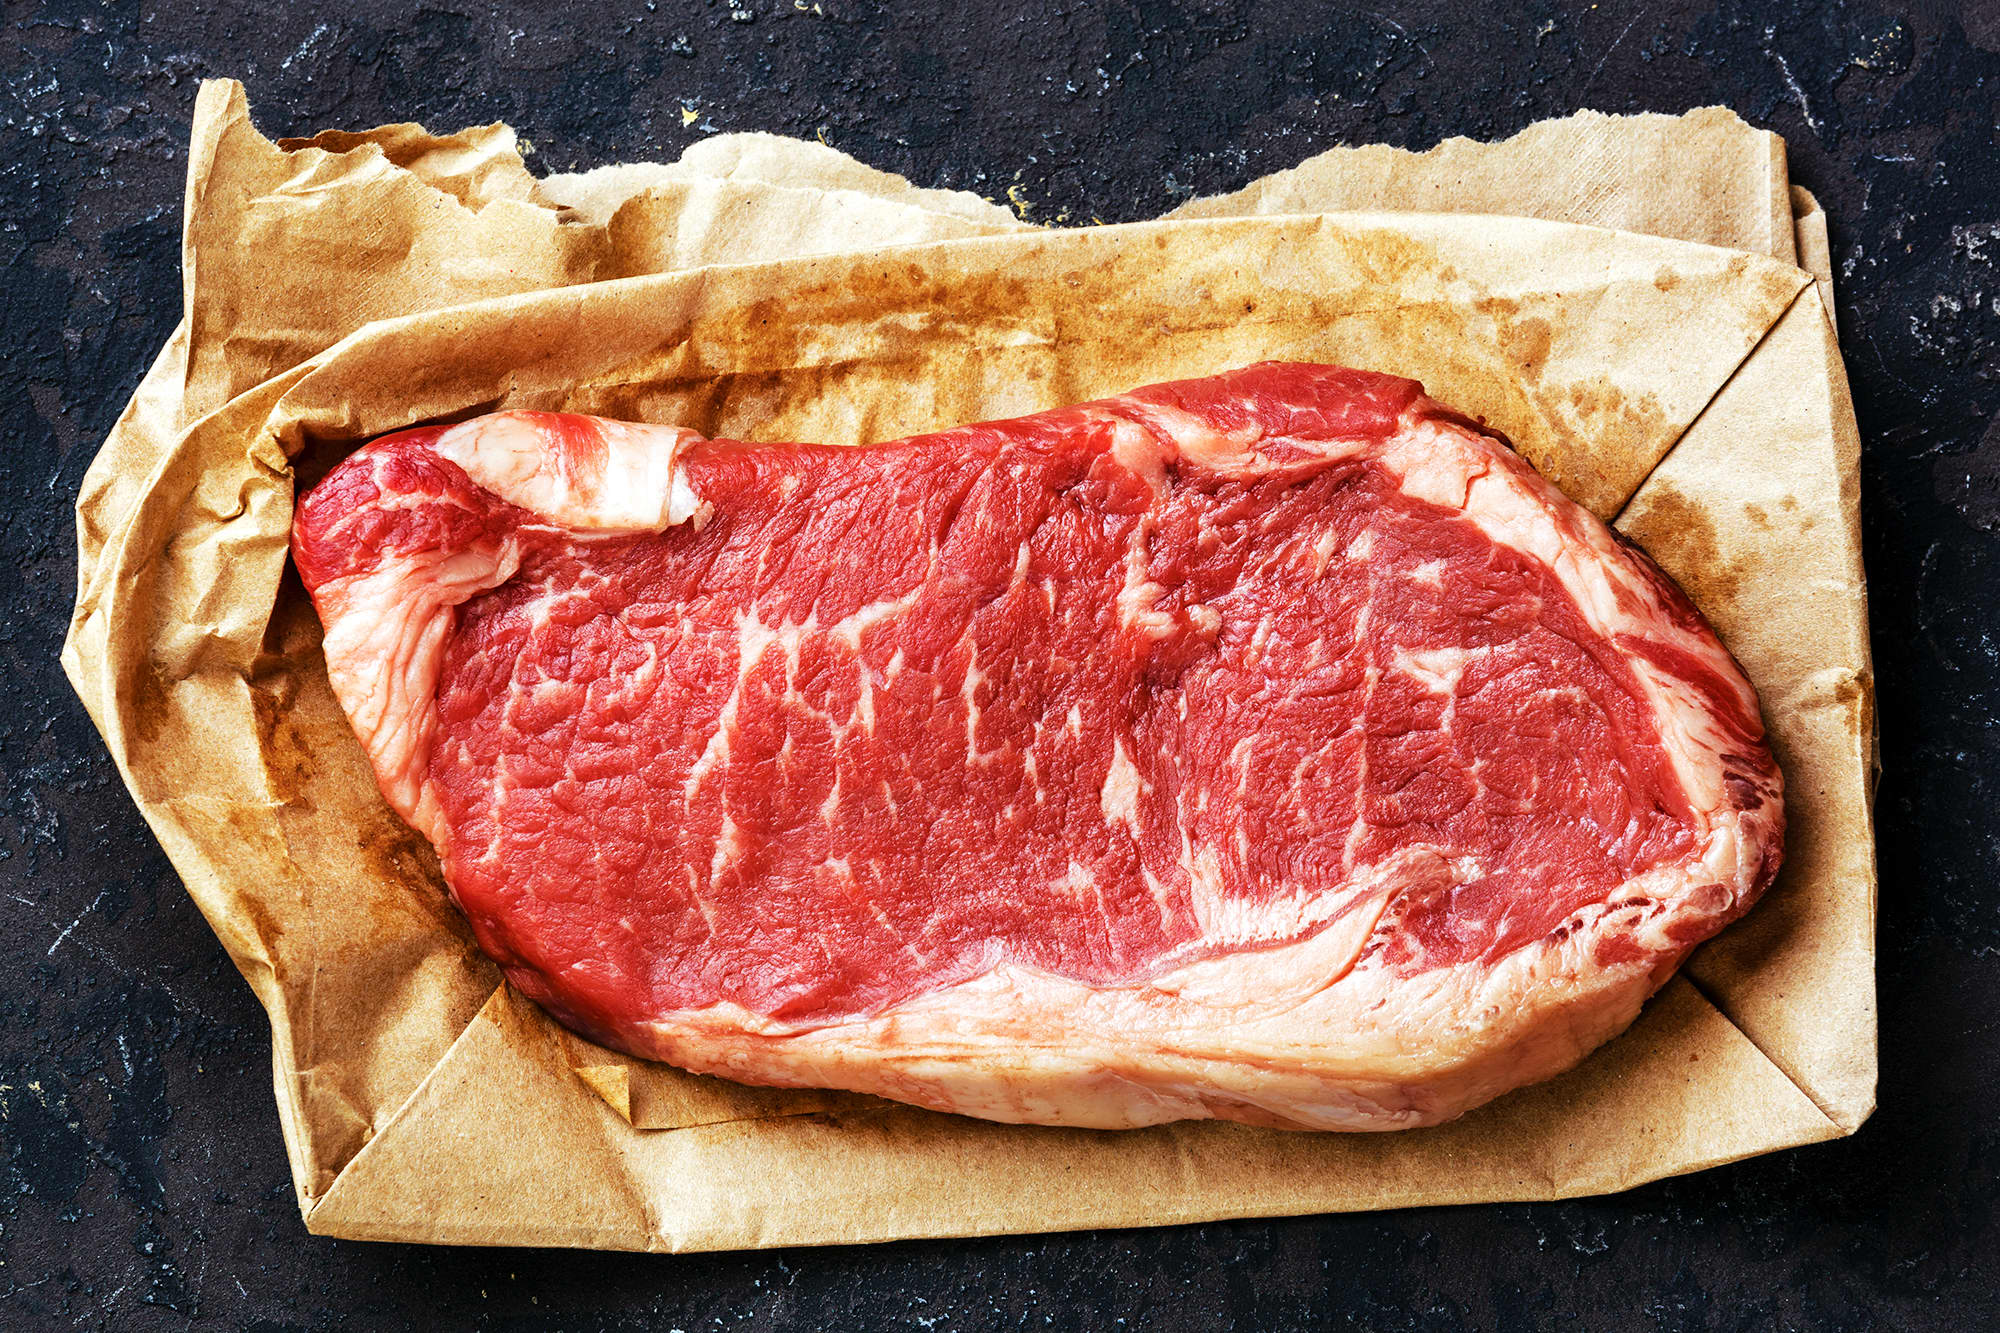 How Long Can Meat Stay In The Fridge Safely?